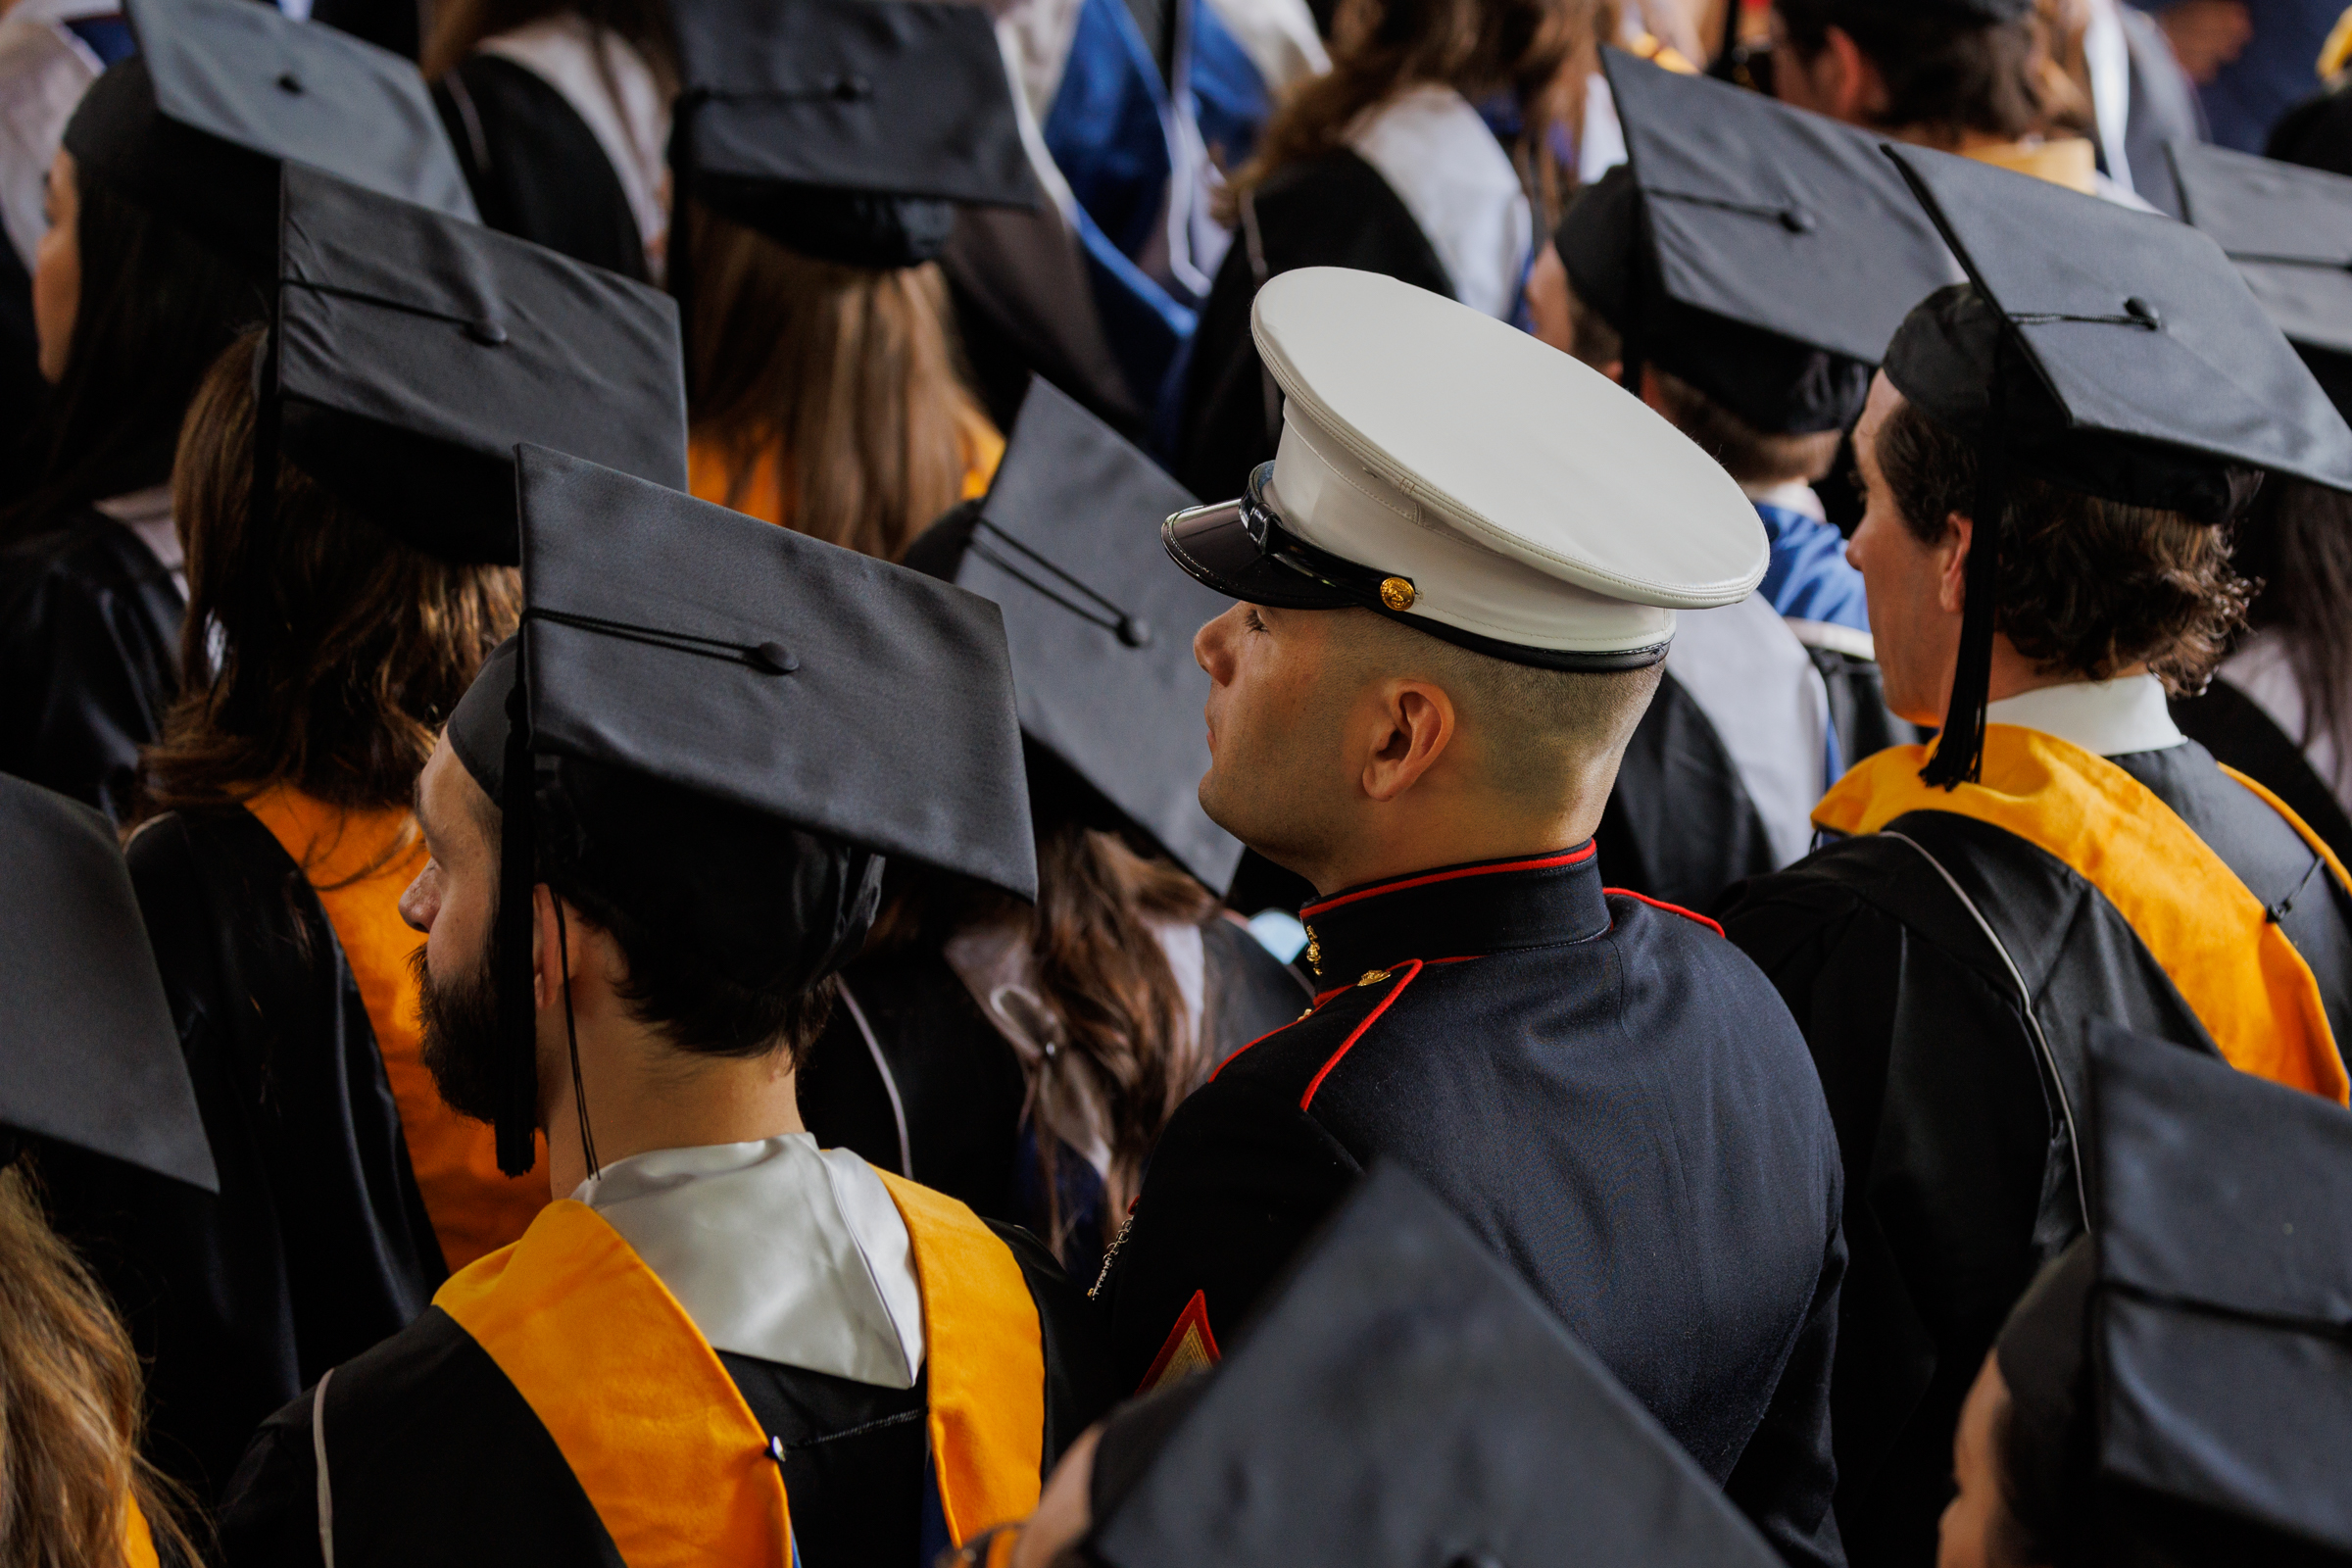 An image of graduation caps and a Marine Corps' white hat.